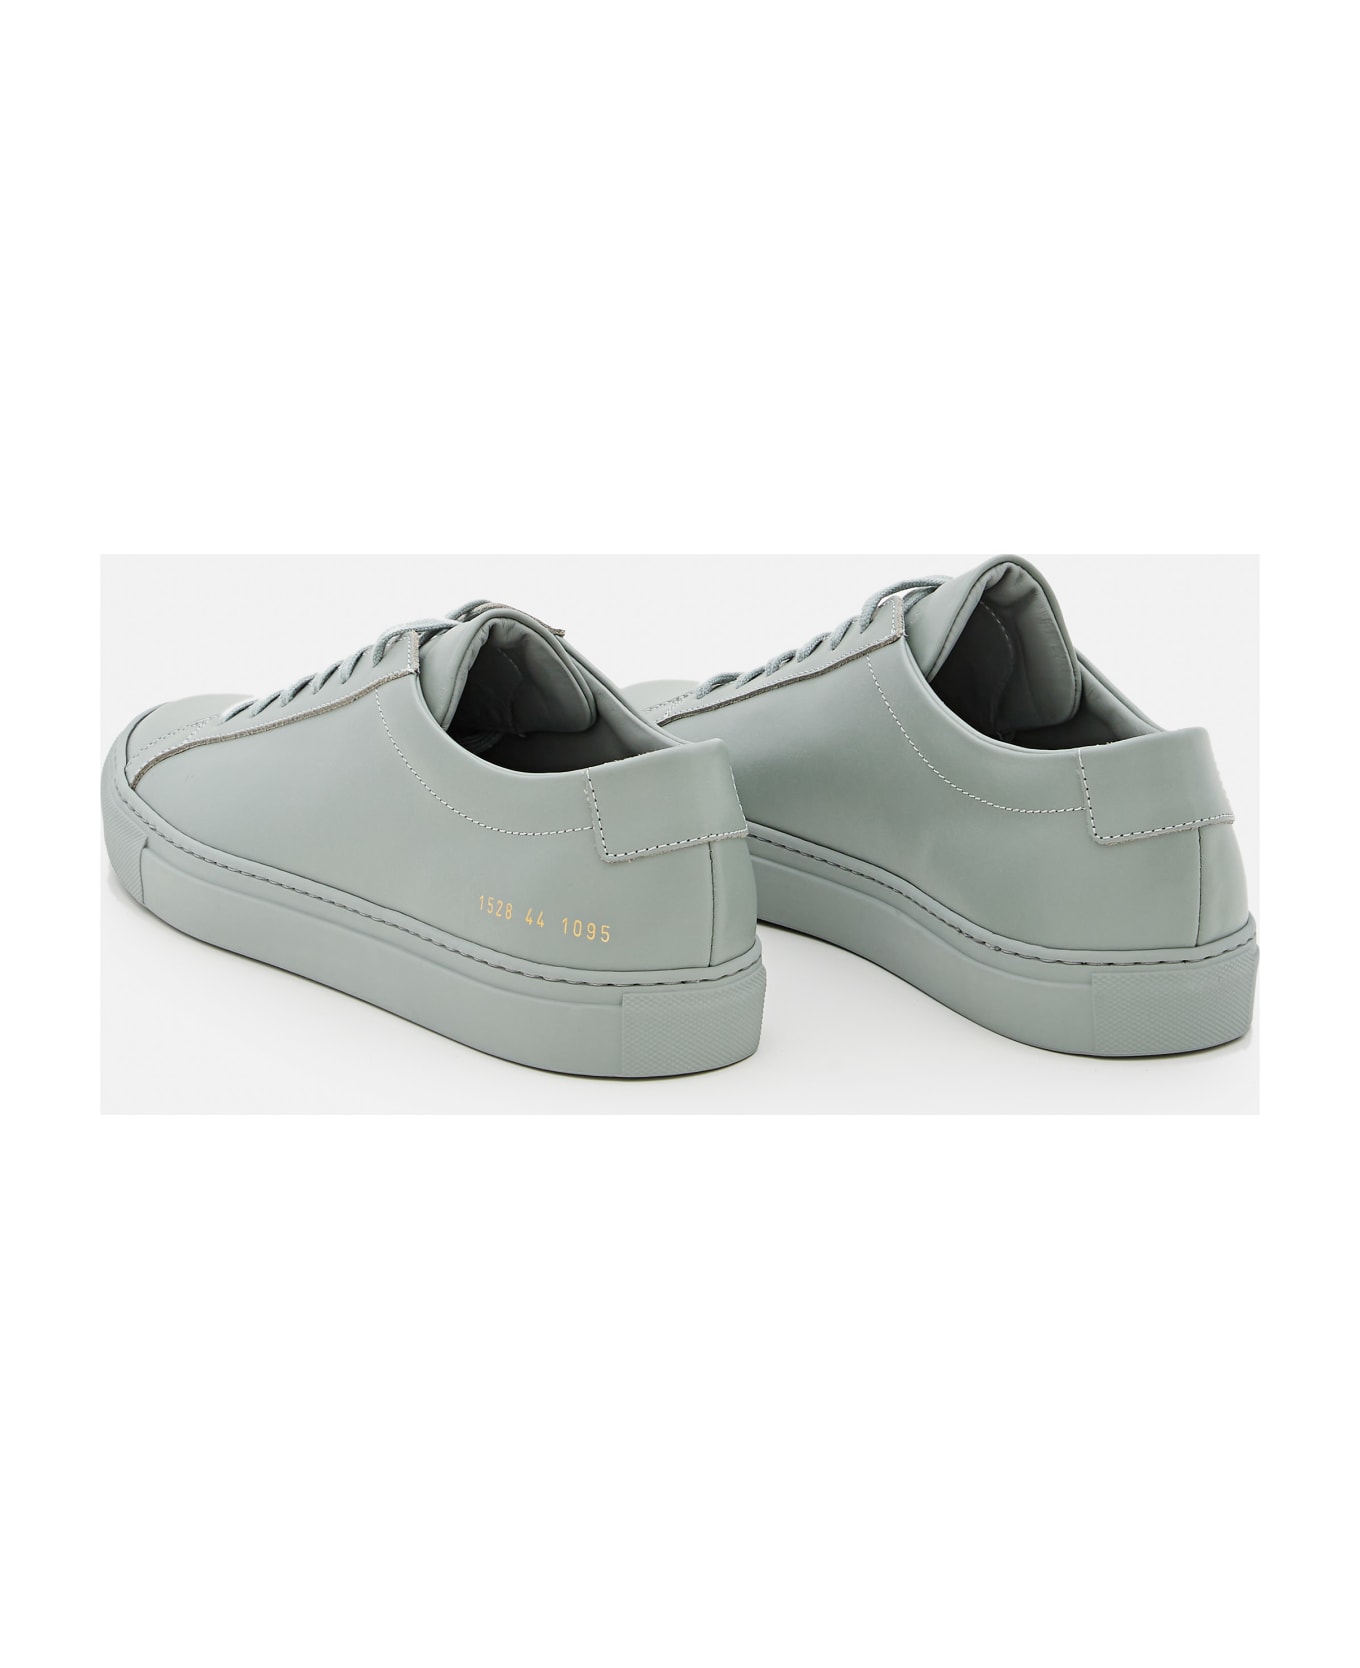 Common Projects Original Achilles Low Sneakers - Green スニーカー